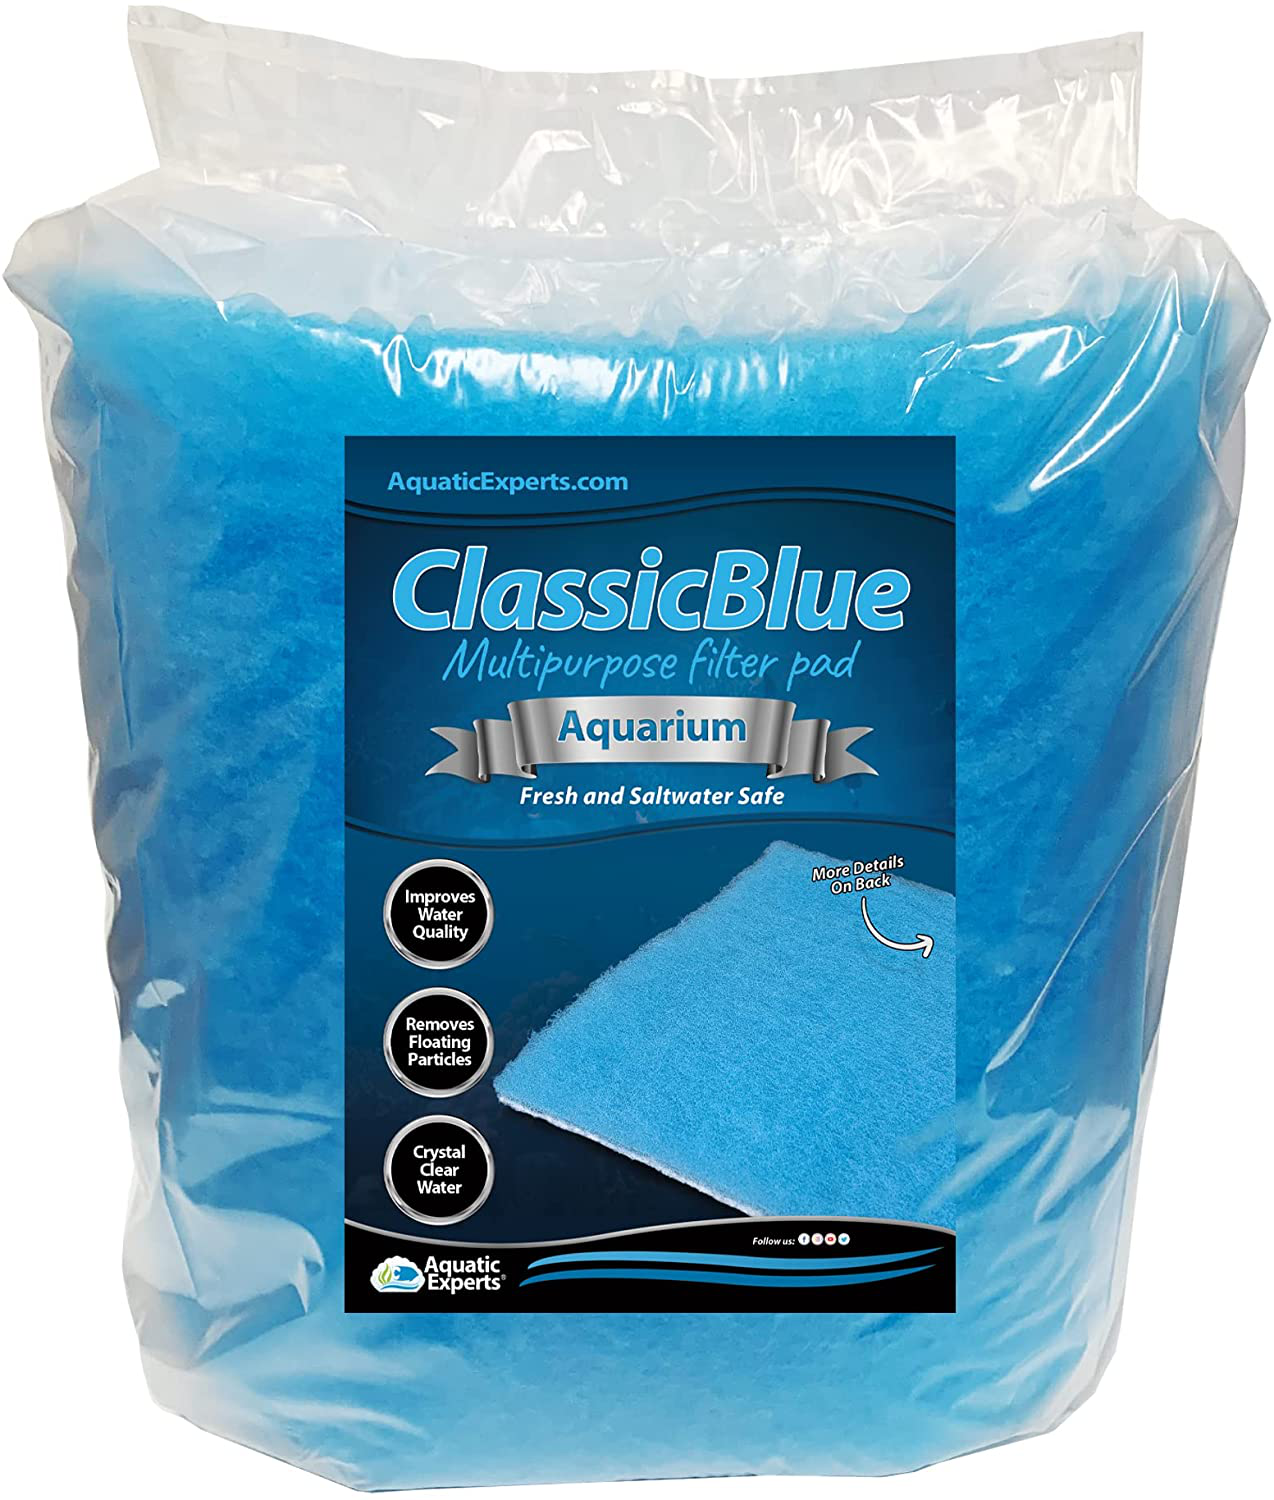 Aquatic Experts Classic Bonded Aquarium Filter Pad - Blue and White Aquarium Filter Media Roll Bulk Can Be Cut to Fit Most Filters, Made in USA